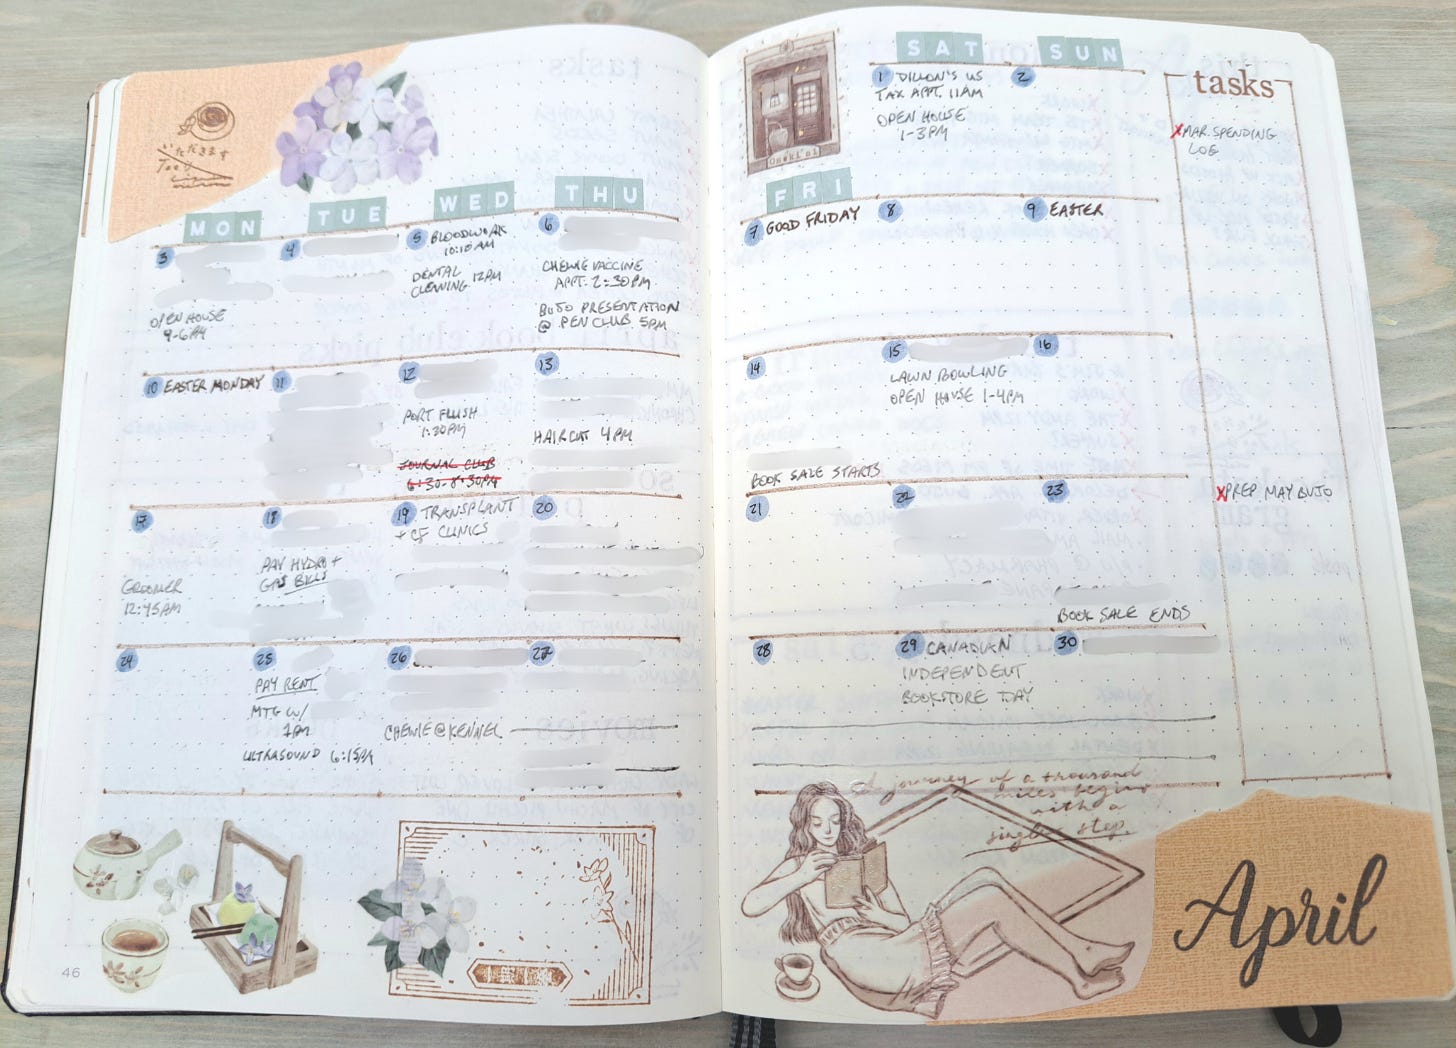 Hand drawn calendar in notebook decorated with paper, stickers, and stamps.